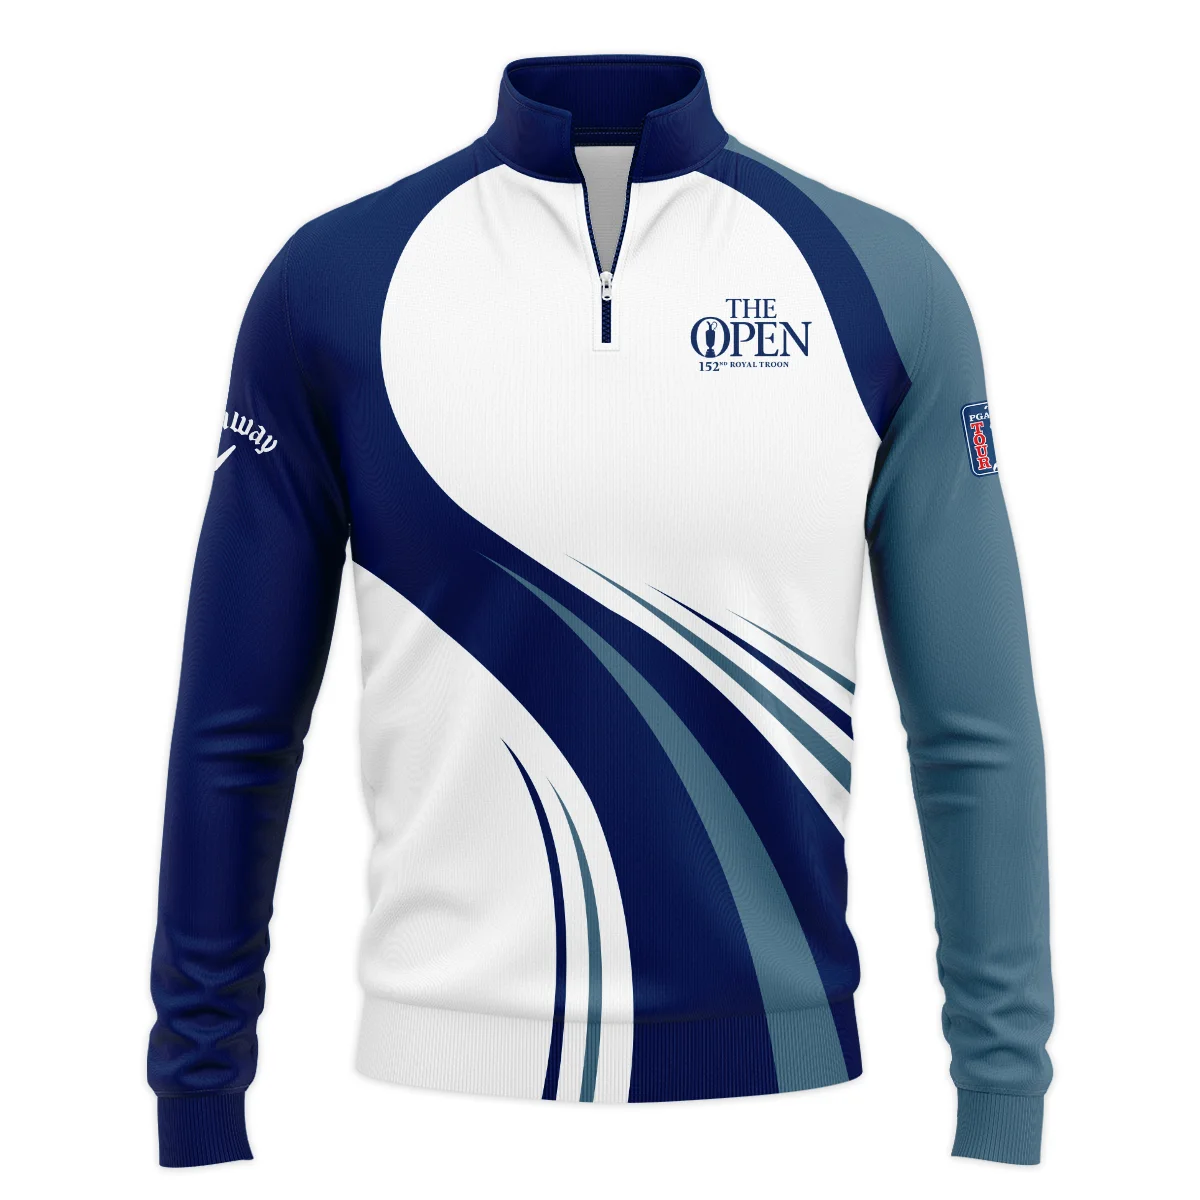 152nd Open Championship Callaway White Mostly Desaturated Dark Blue Quarter-Zip Jacket All Over Prints HOTOP270624A02CLWSWZ